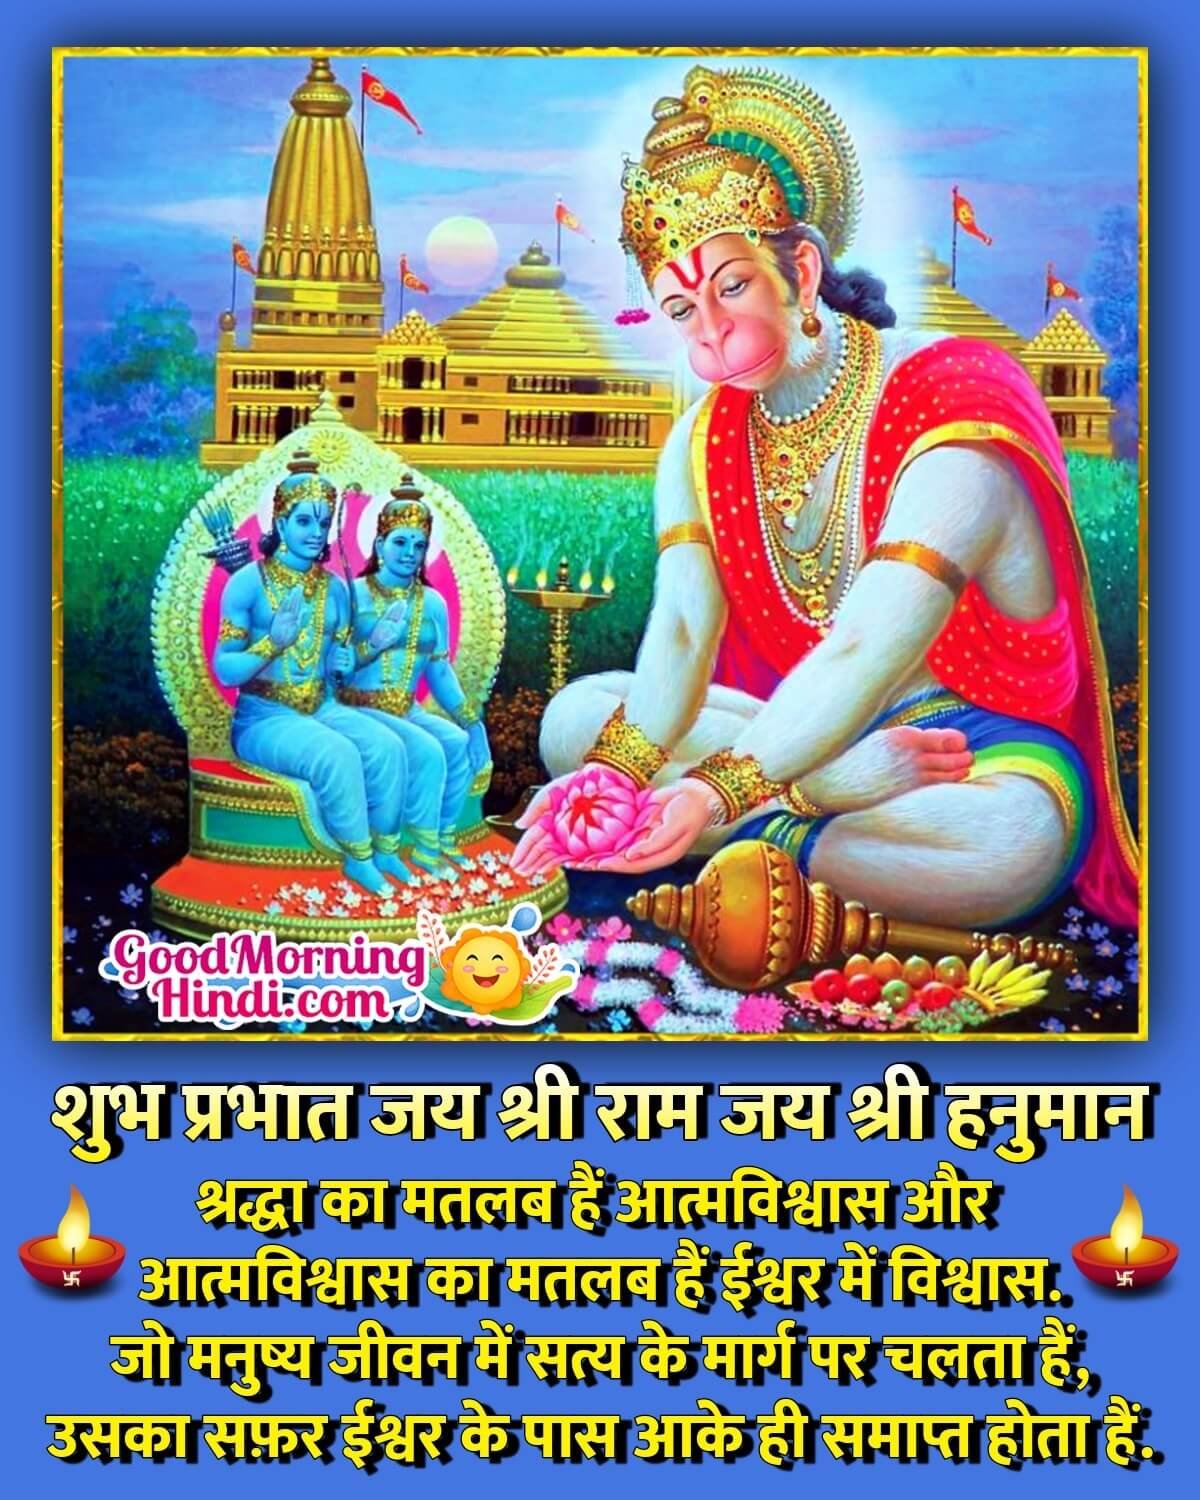 Good Morning God Images With Quotes In Hindi - Good Morning Wishes ...